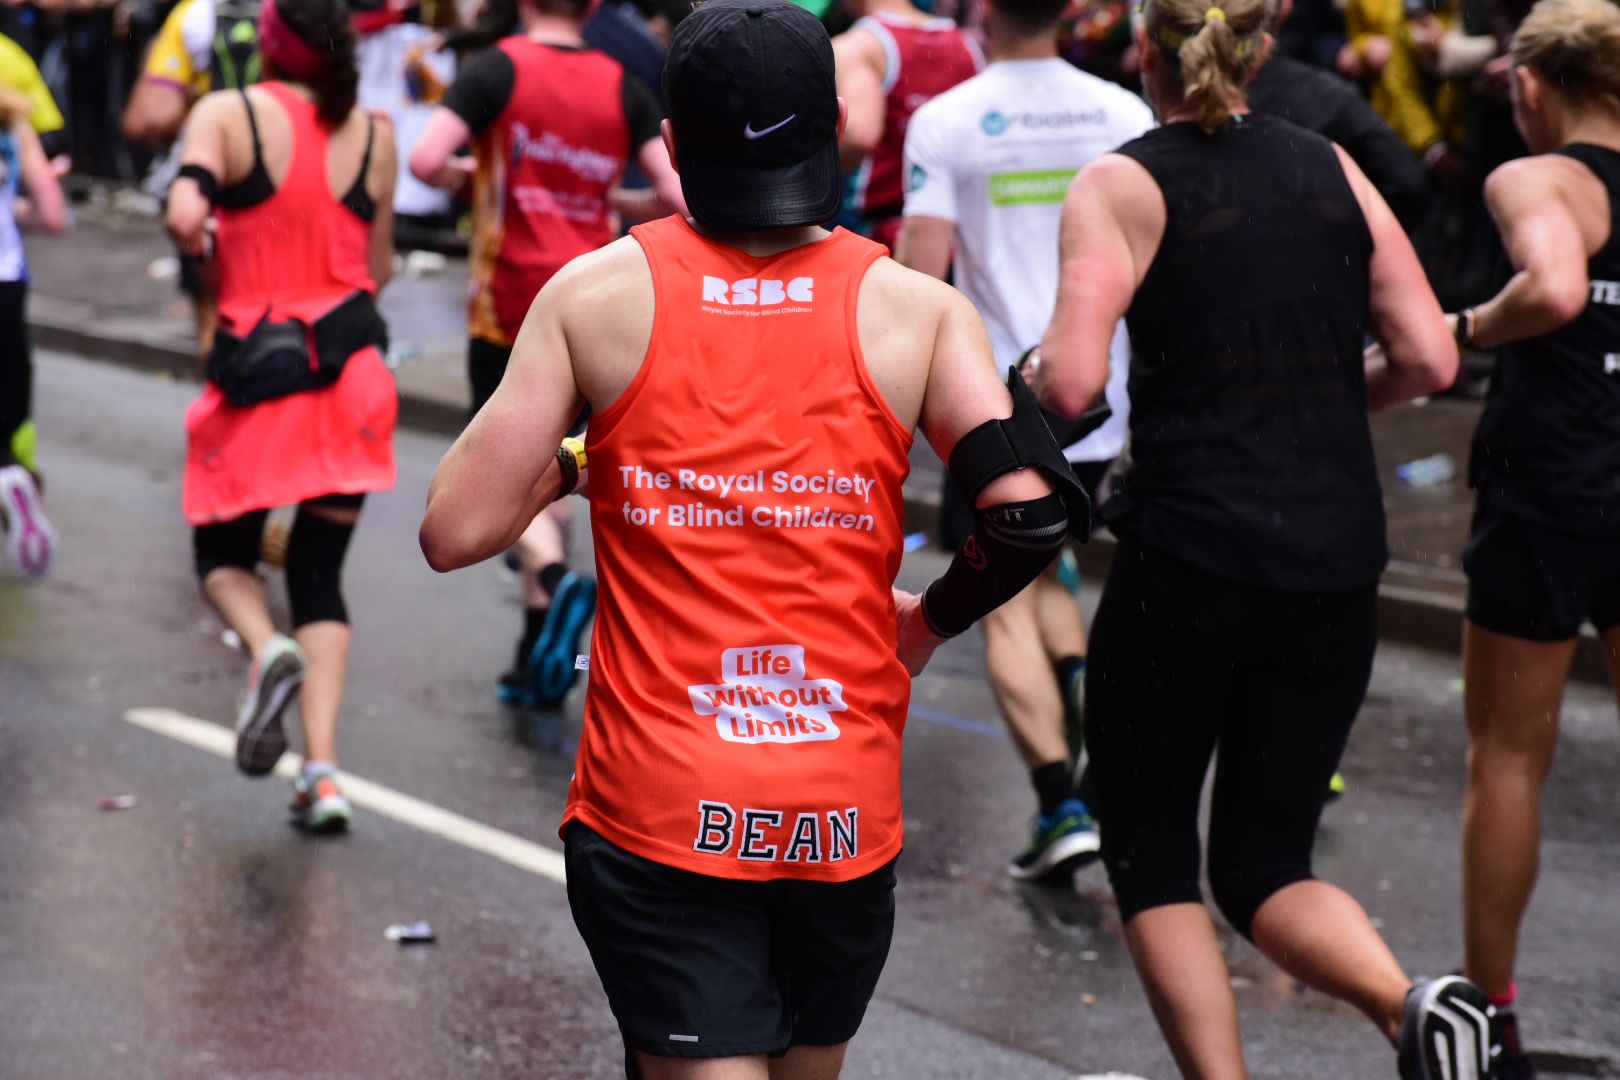 Back of a runner at the London Marathon wearing a branded RSBC orange running top